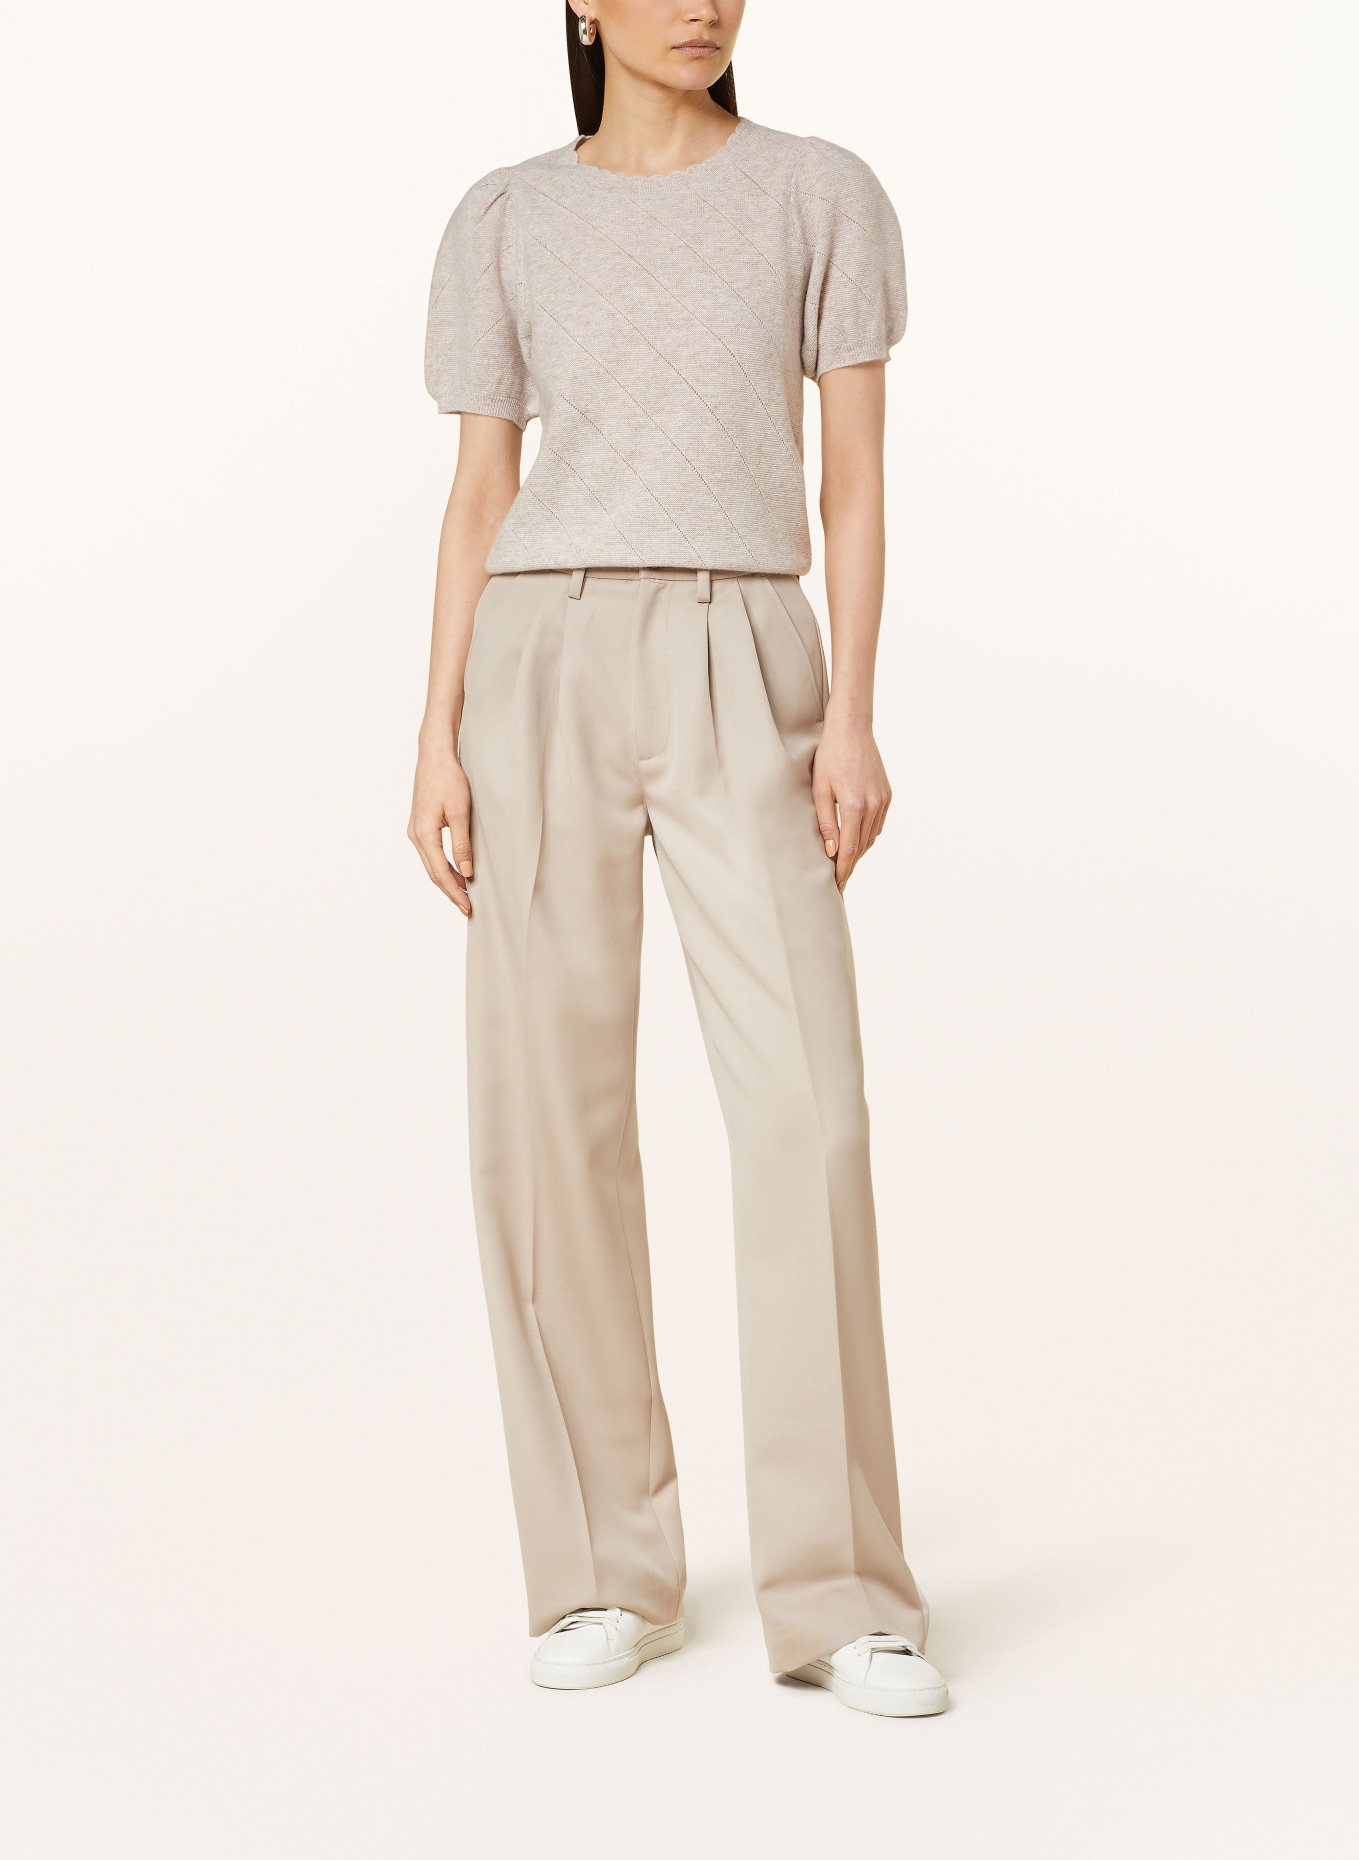 REPEAT Knit shirt in cashmere, Color: TAUPE (Image 2)